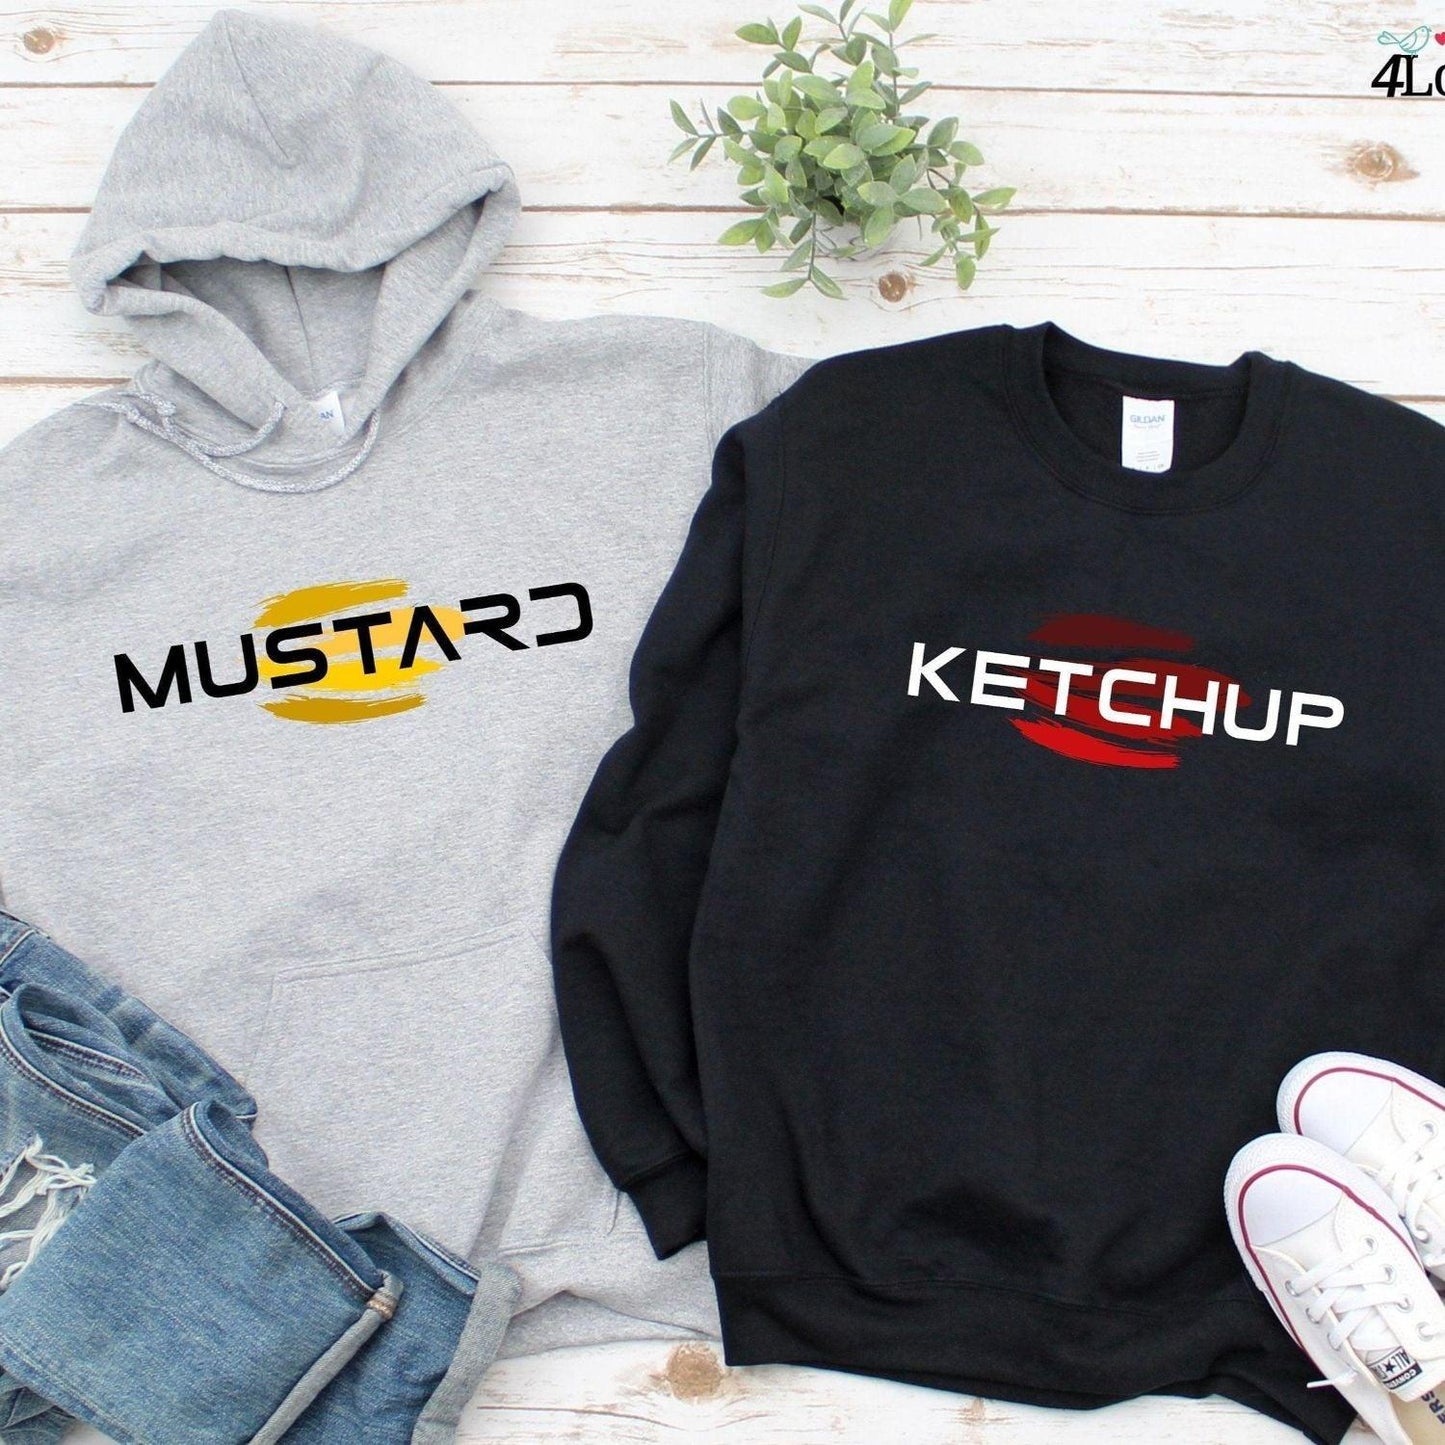 Matching Couple Outfit: His & Hers Ketchup & Mustard | Gifts For Couples - 4Lovebirds